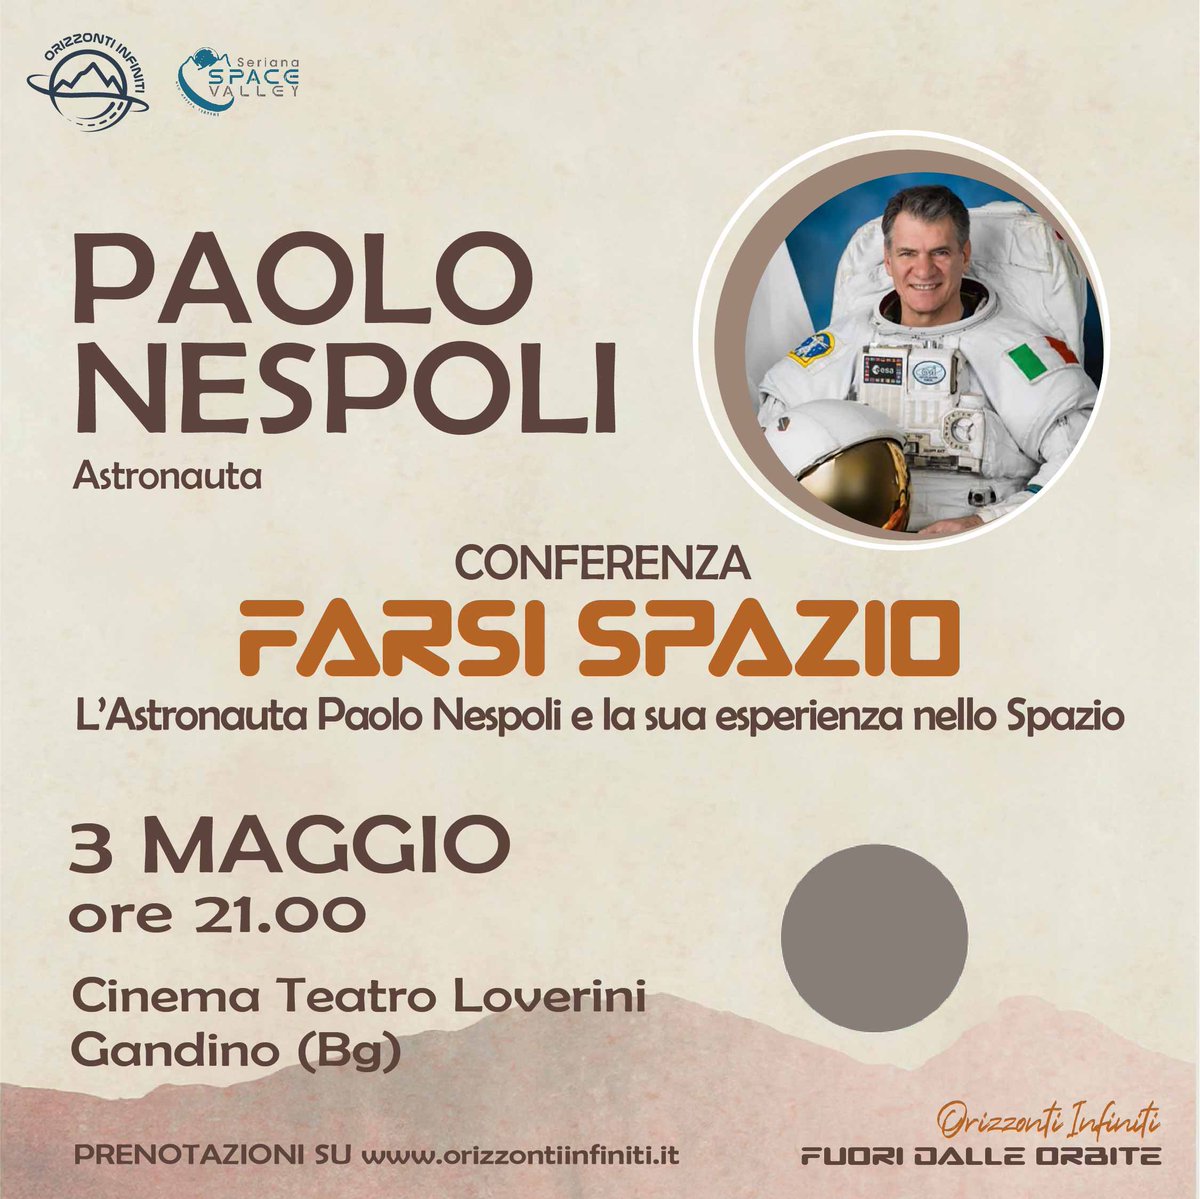 Another important step in the development of Seriana Space Valley:
The second edition of Orizzonti Infiniti (Italian only) ( (ww.orizzoninfiniti.it) starts in May.
The start is 3th May with astronaut Paolo Nespoli
#education #spaceexploration #space #SpaceEconomy #spaceindustry